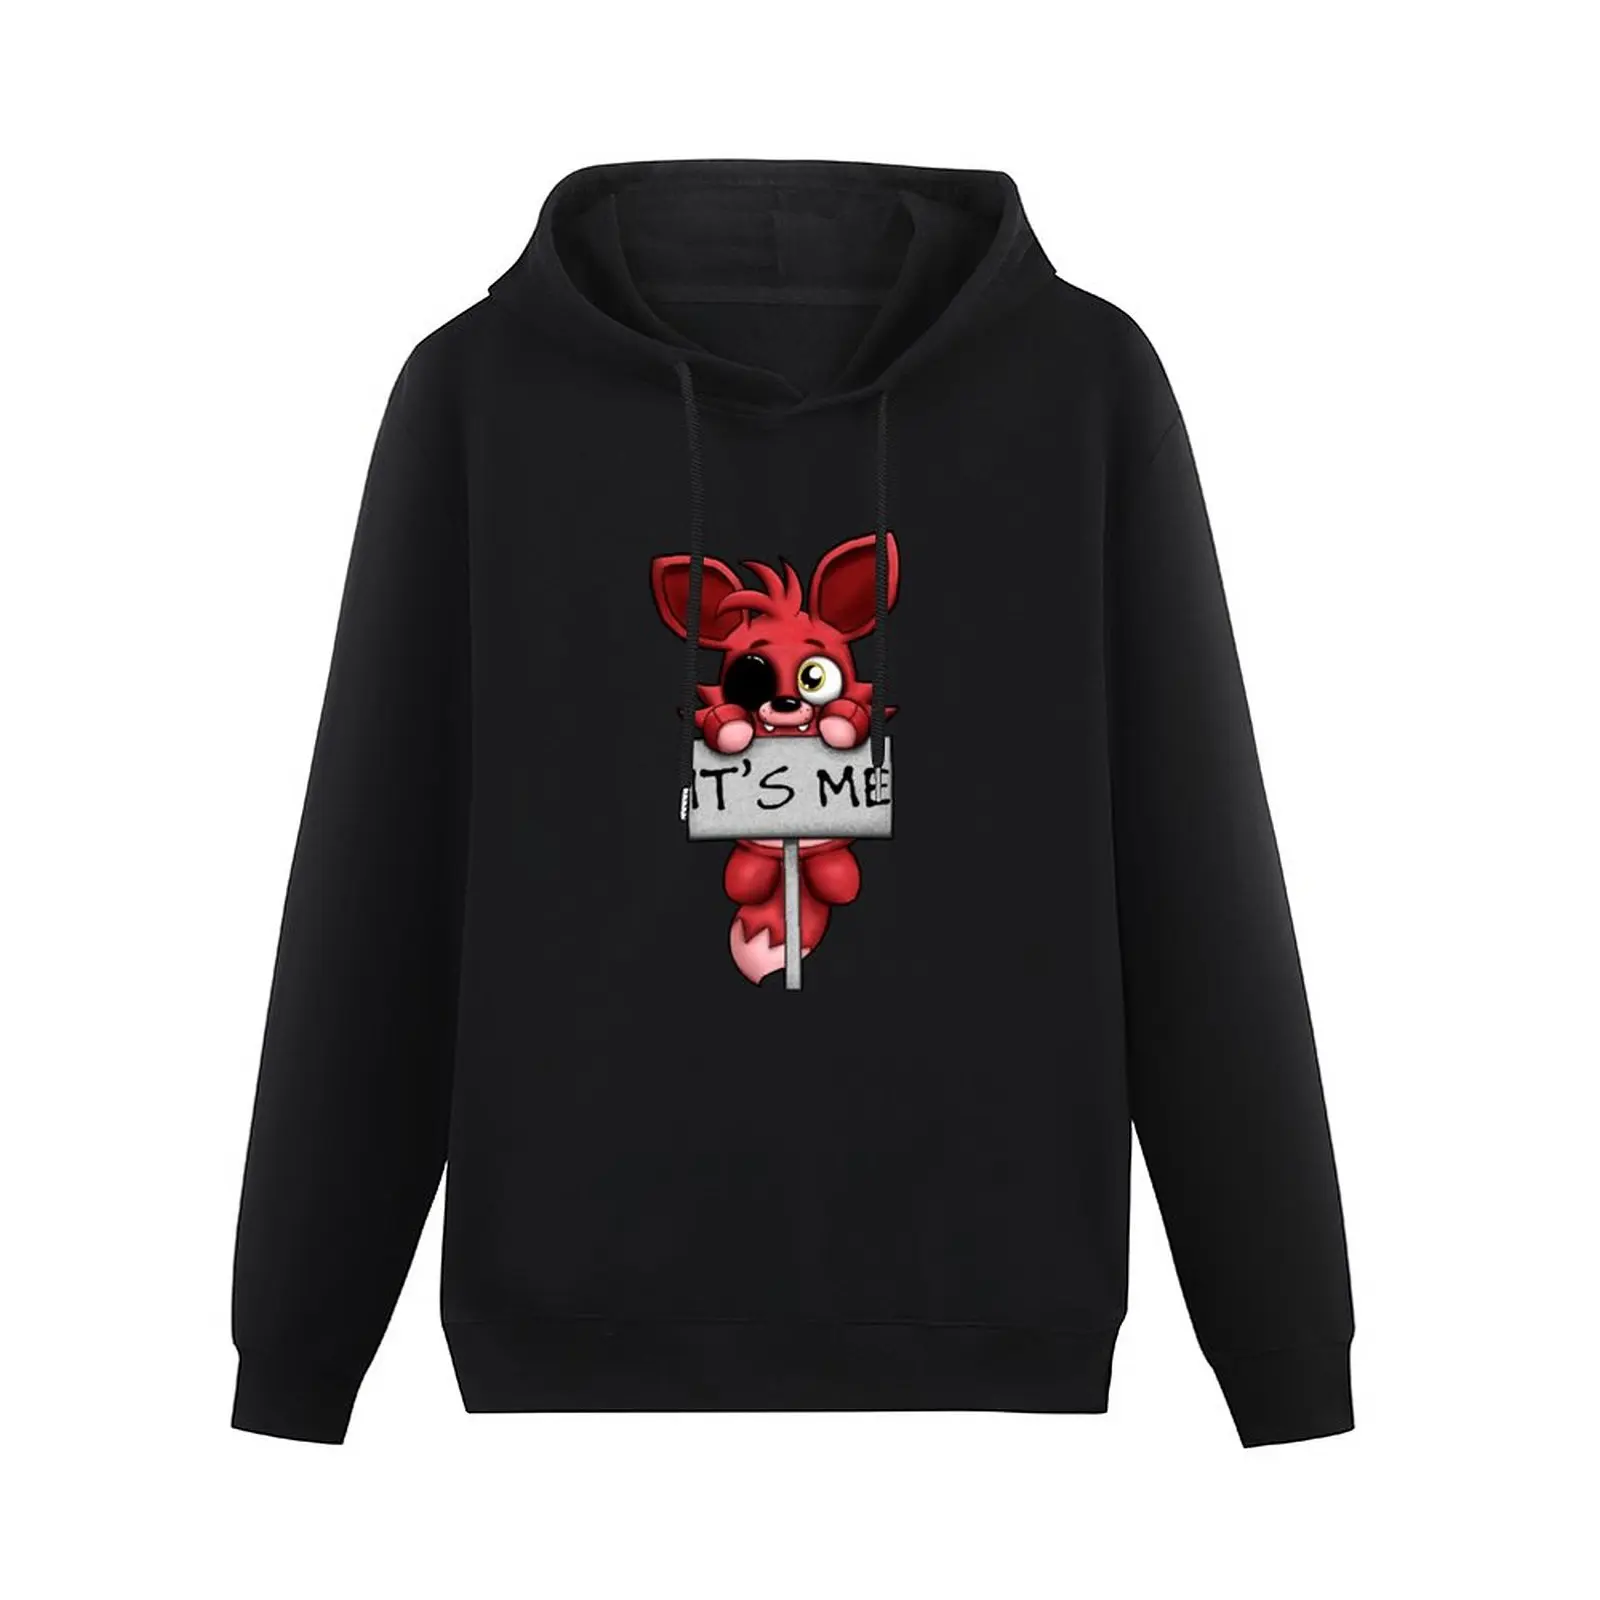 New FNAF Plush Foxy Pullover Hoodie men s autumn clothes mens clothing men clothes hoodies for 2 - FNAF Plush